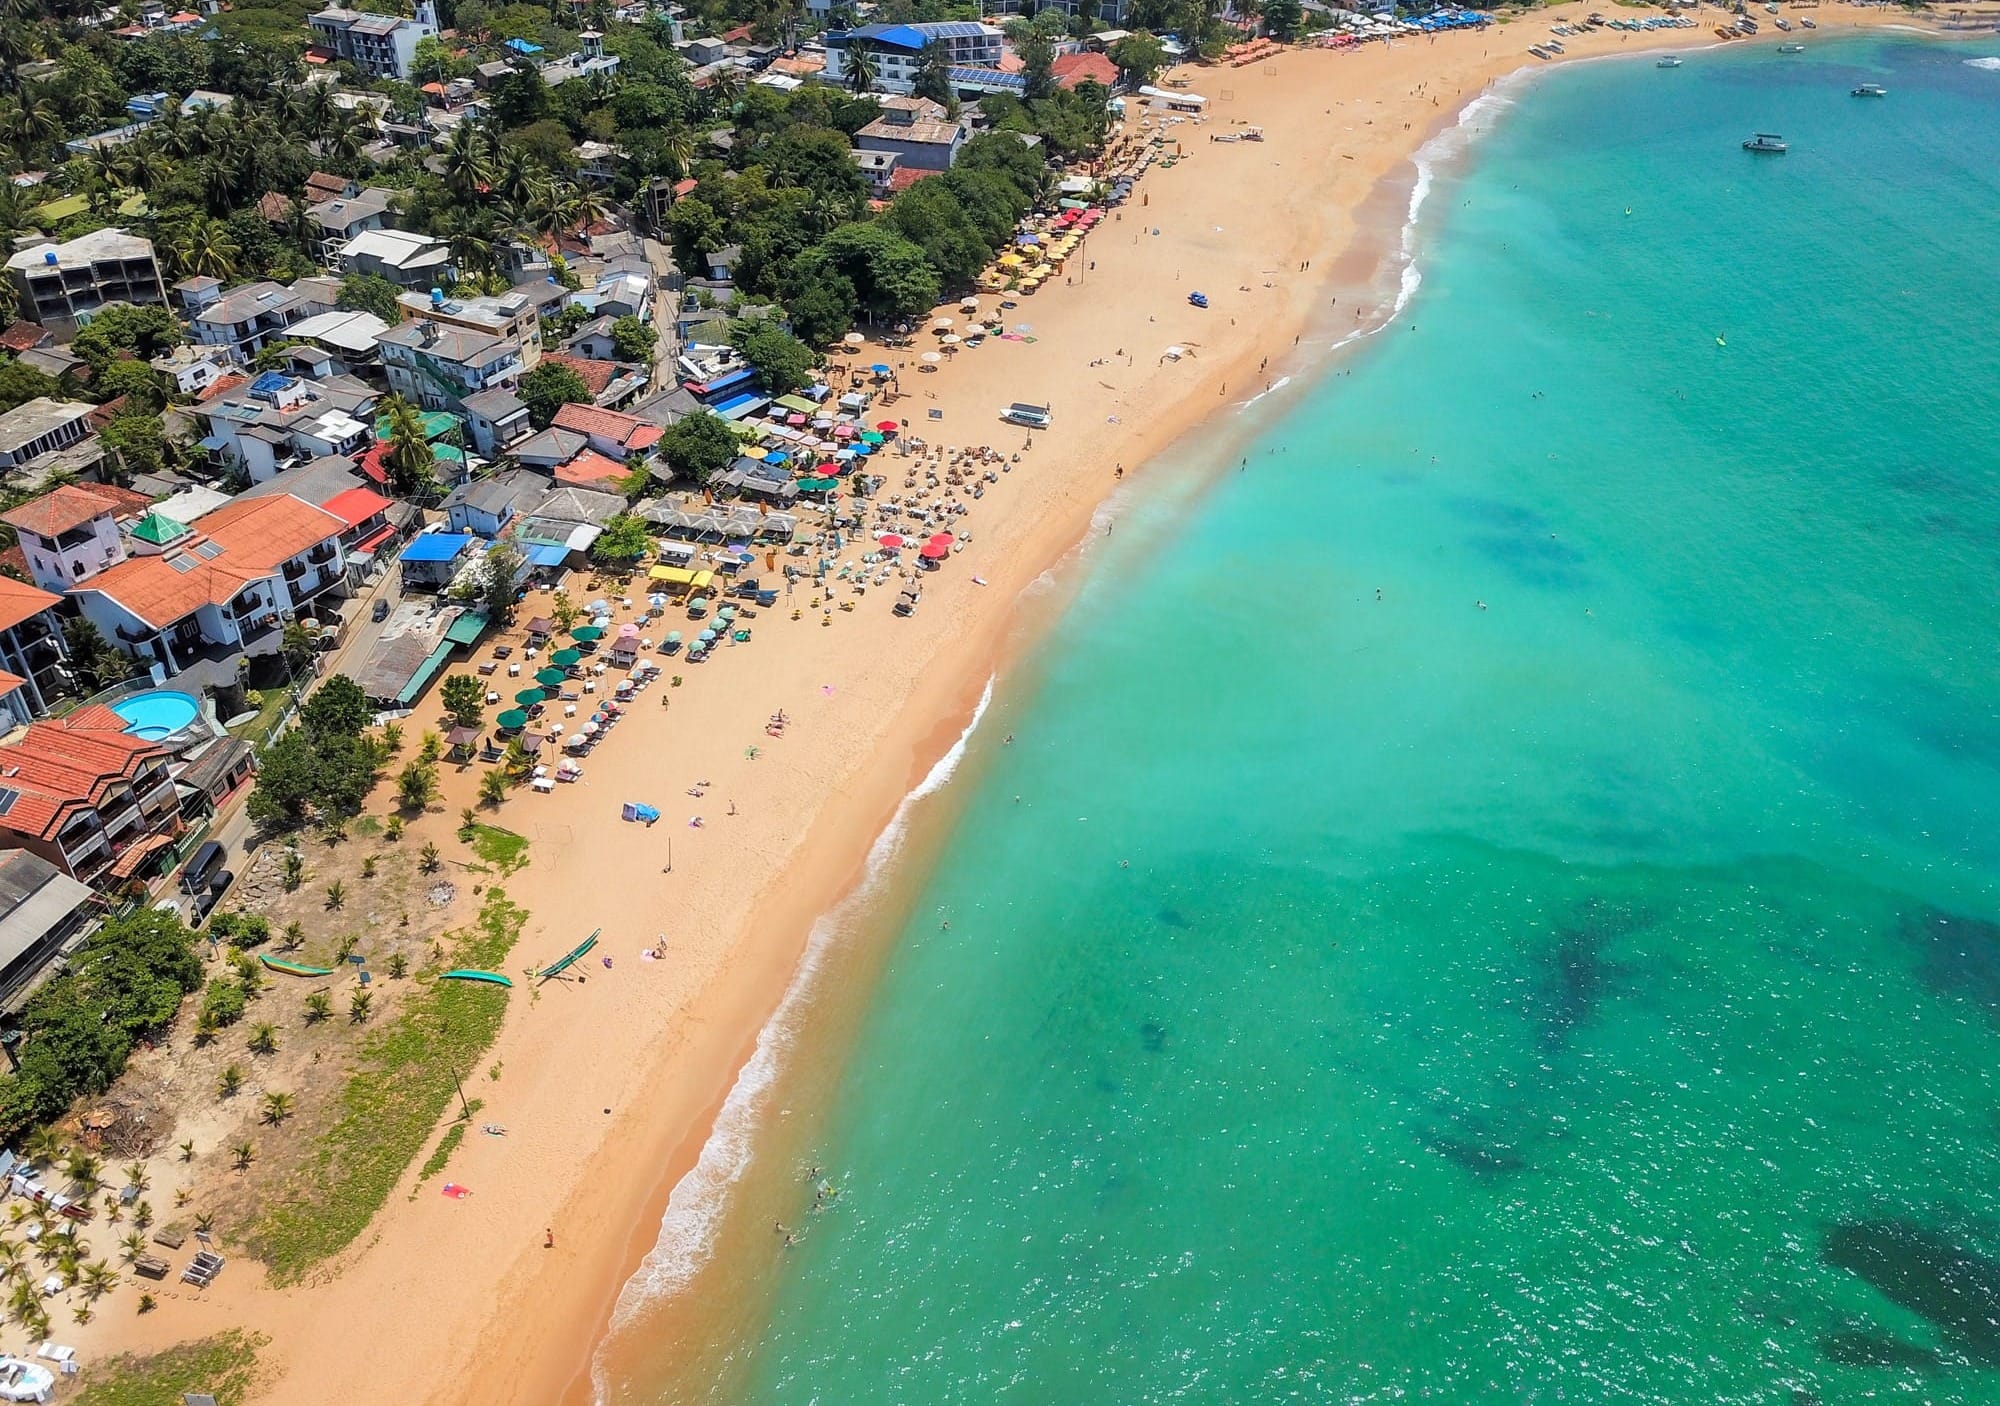 Unawatuna Beach near Galle, with its turquoise waters, hotels and beachgoers seen from above